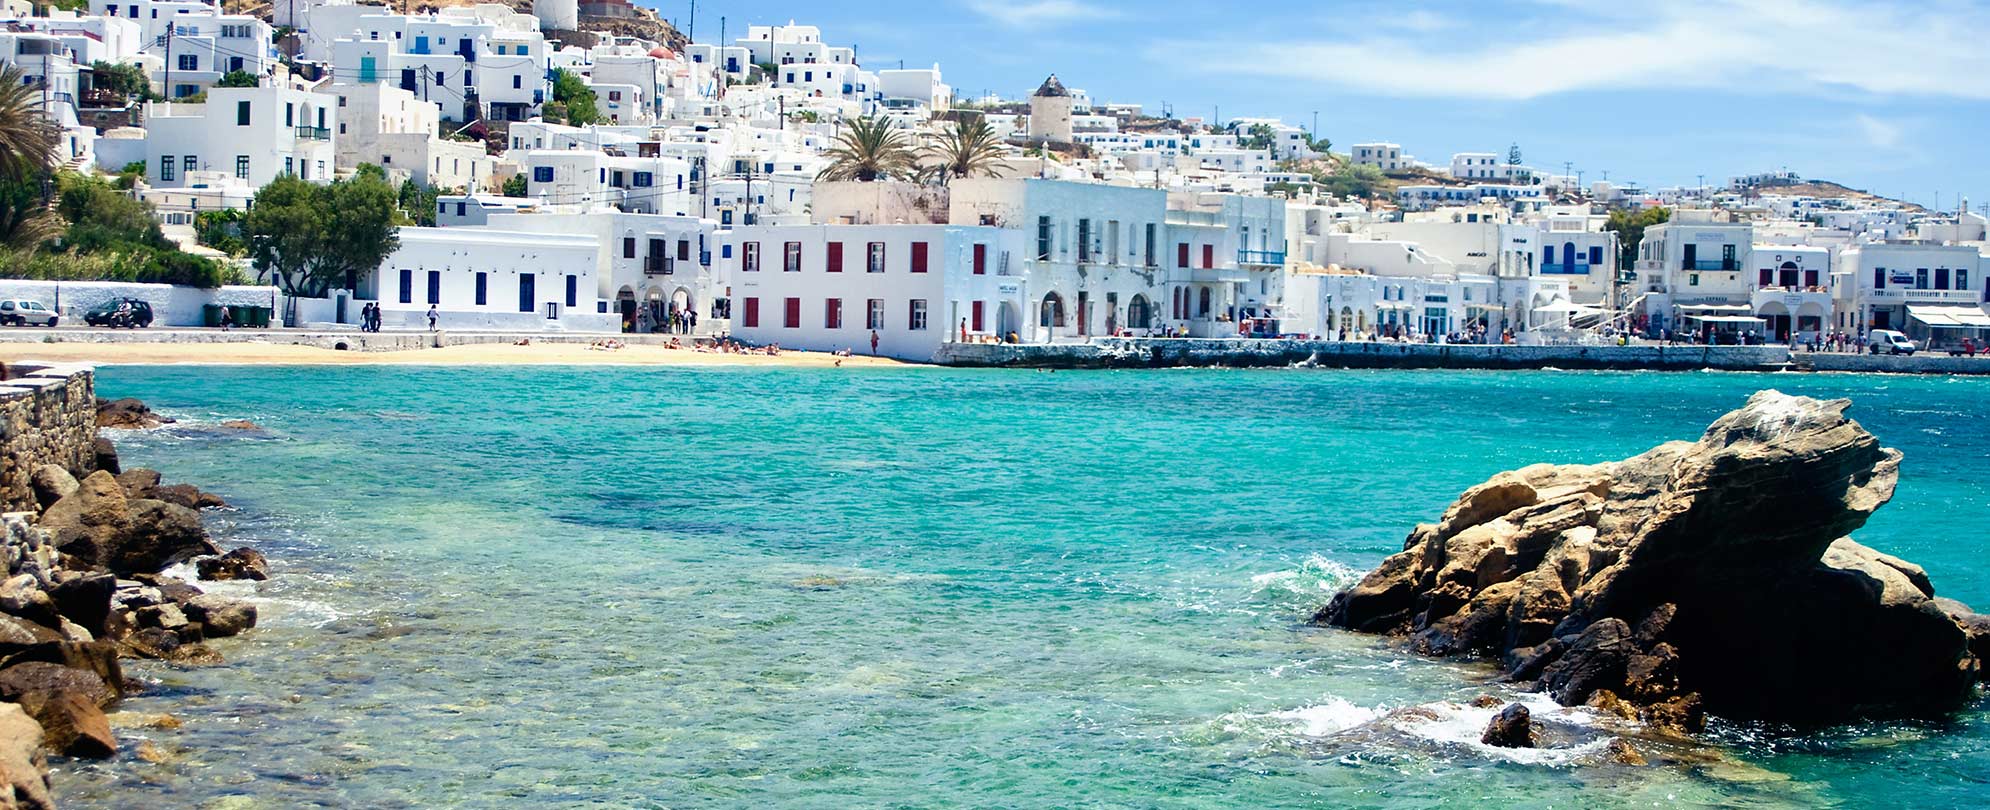 Sparkling water and white villas next to a rocky shoreline on a beach in Mykonos, Greece.